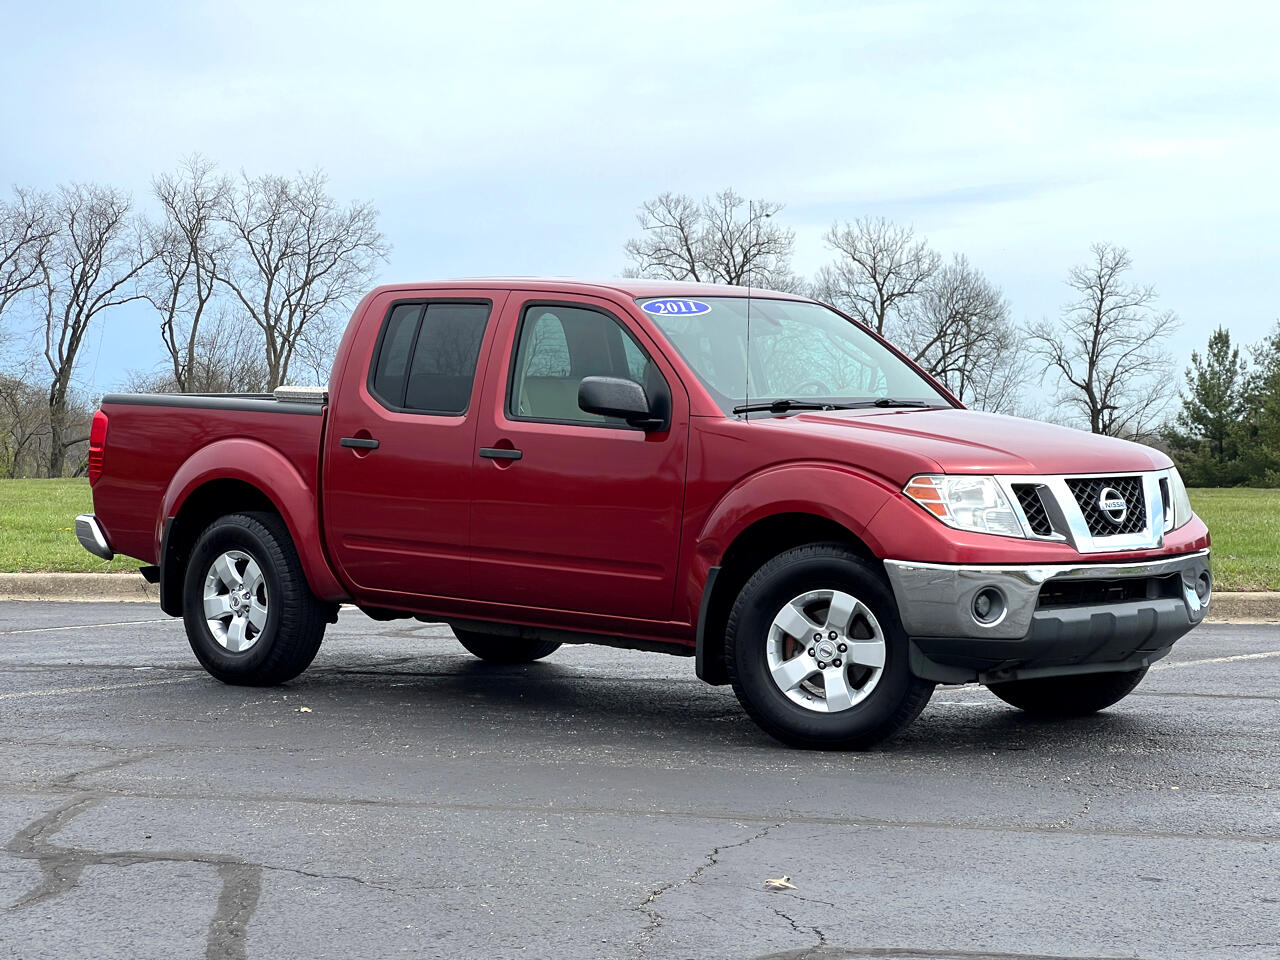 2011 Nissan Frontier 4WD Crew Cab SWB Manual SV